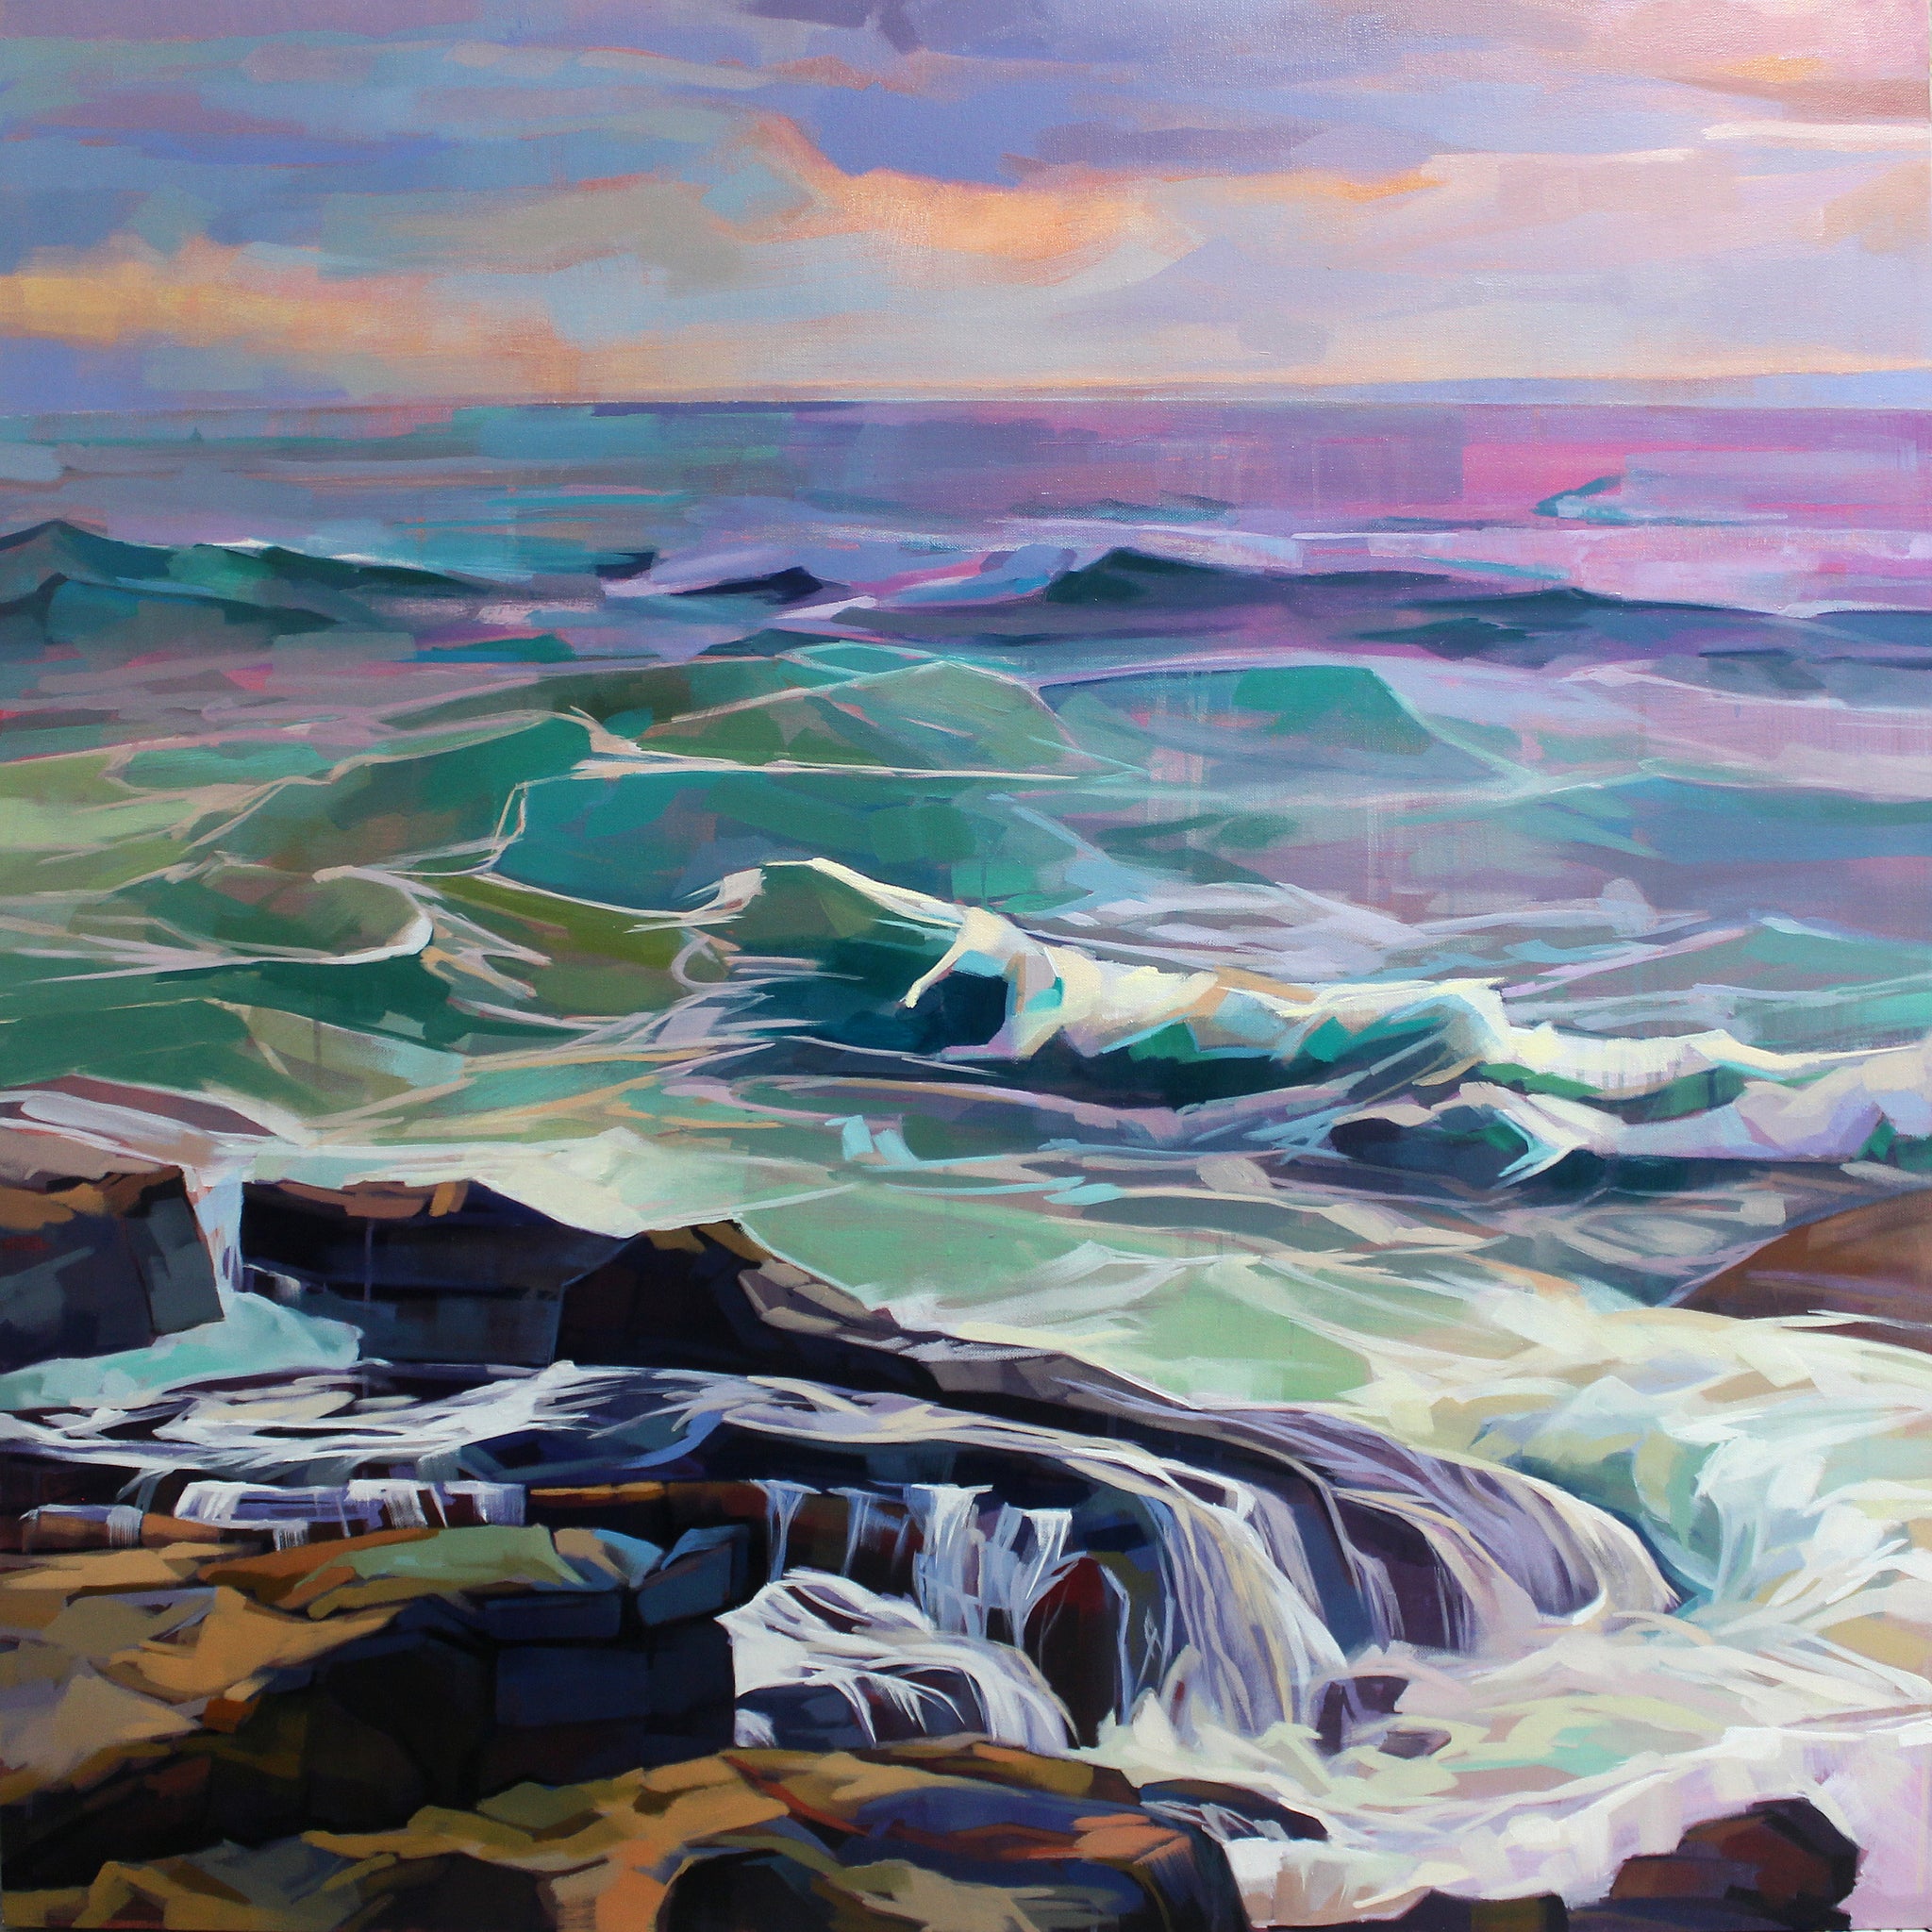 Creevy, Storm Eleanor - Pack Of 10 Greeting Cards - Contemporary art from Ireland. Paintings & prints by Irish seascape & landscape artist Kevin Lowery.